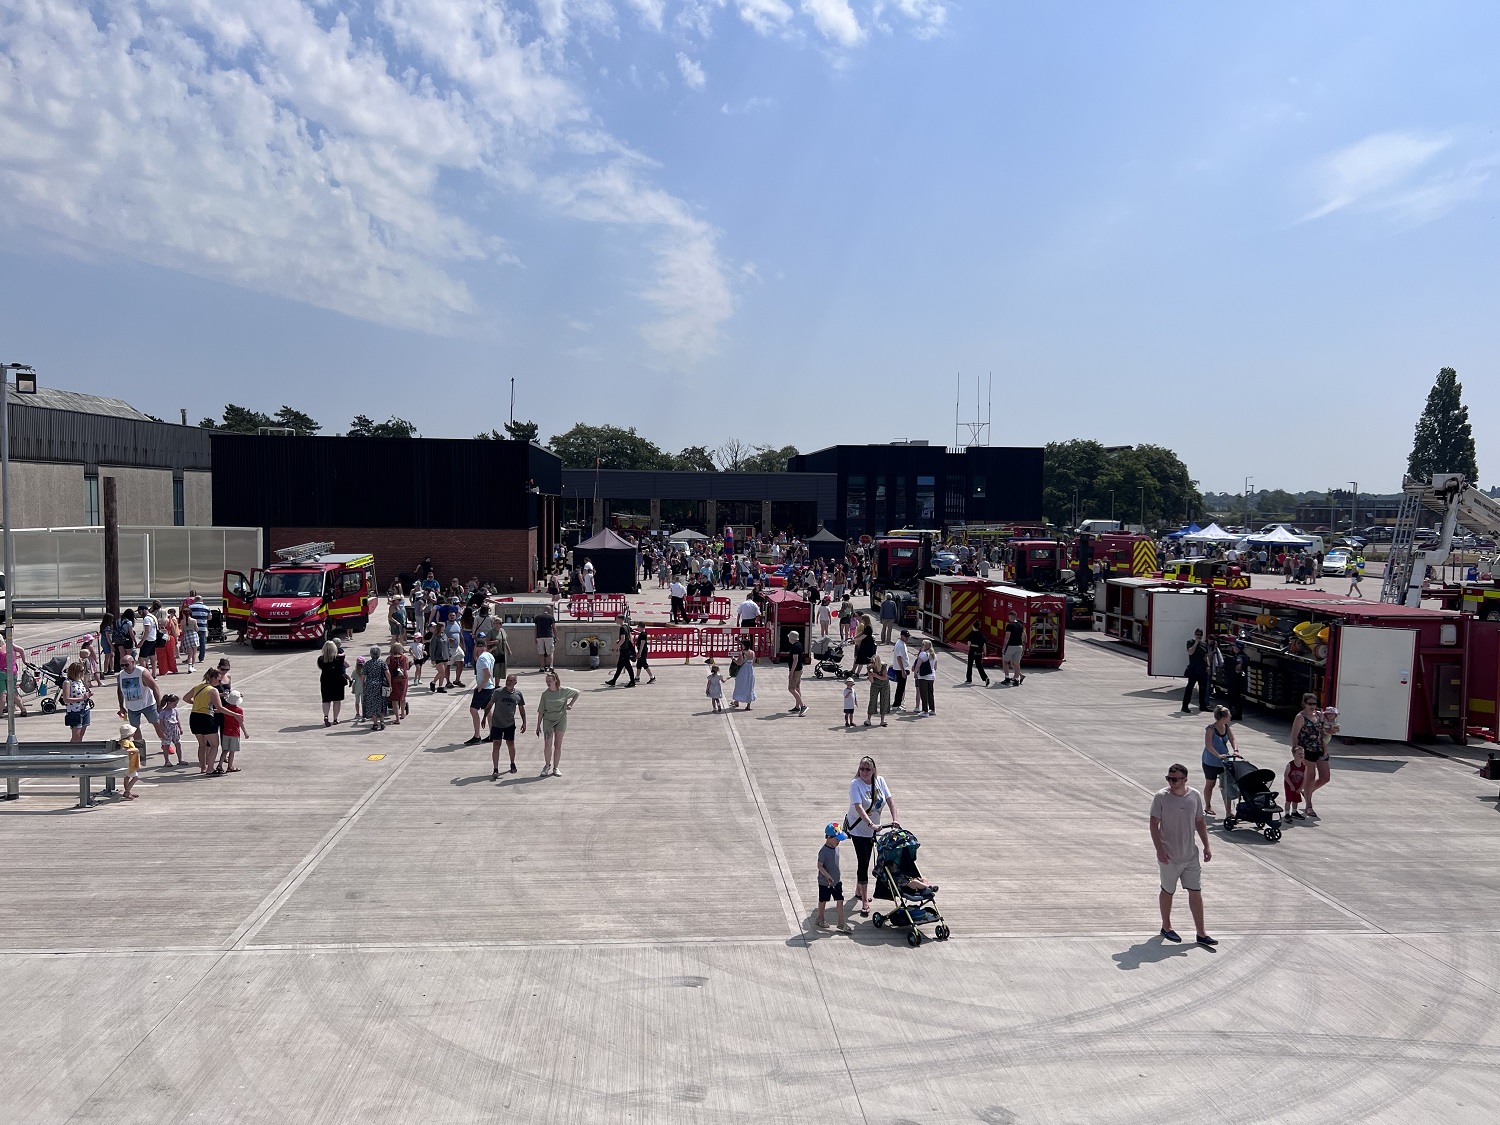 Wyre Forest Fire Station hosts successful first open day